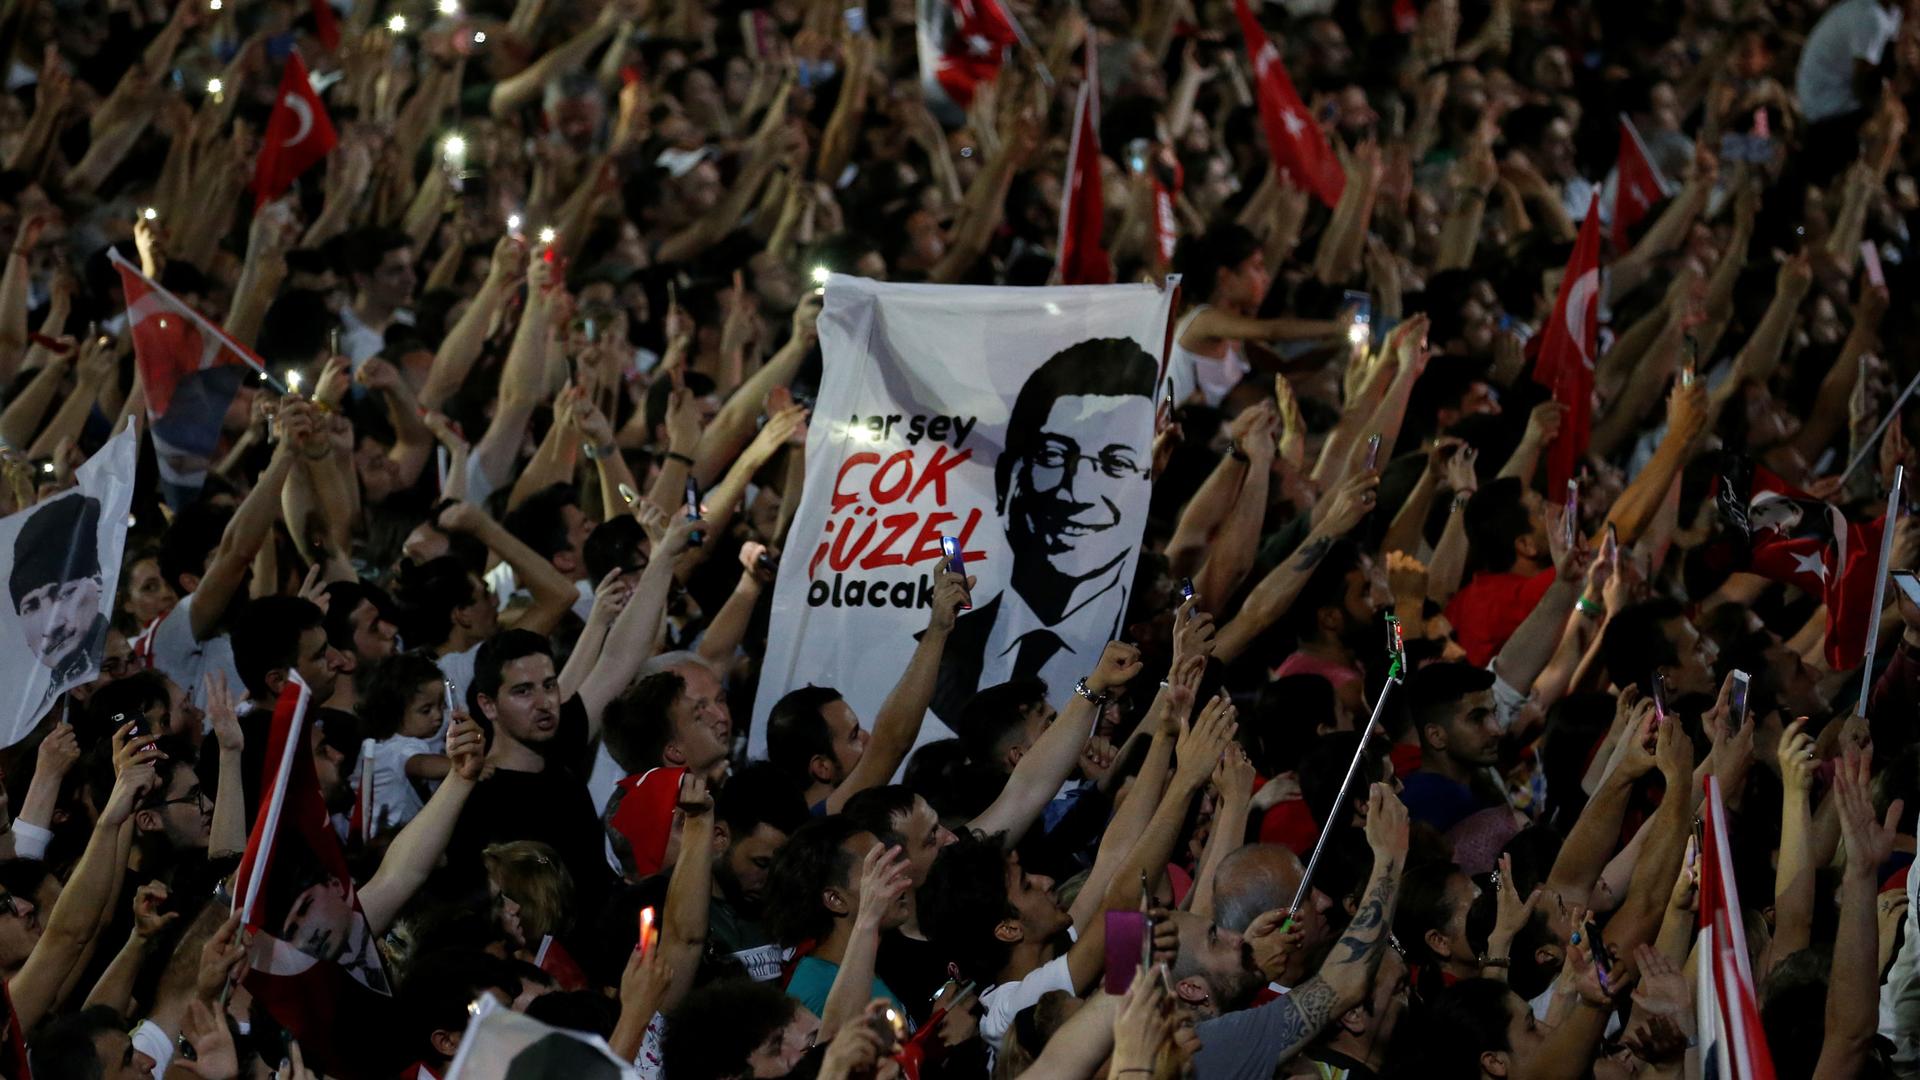 Hundres of people are shown with their hands in the air holding lighters and Turkey flags with a white sign in the middle with a portrait of Ekrem İmamoğlu on it.